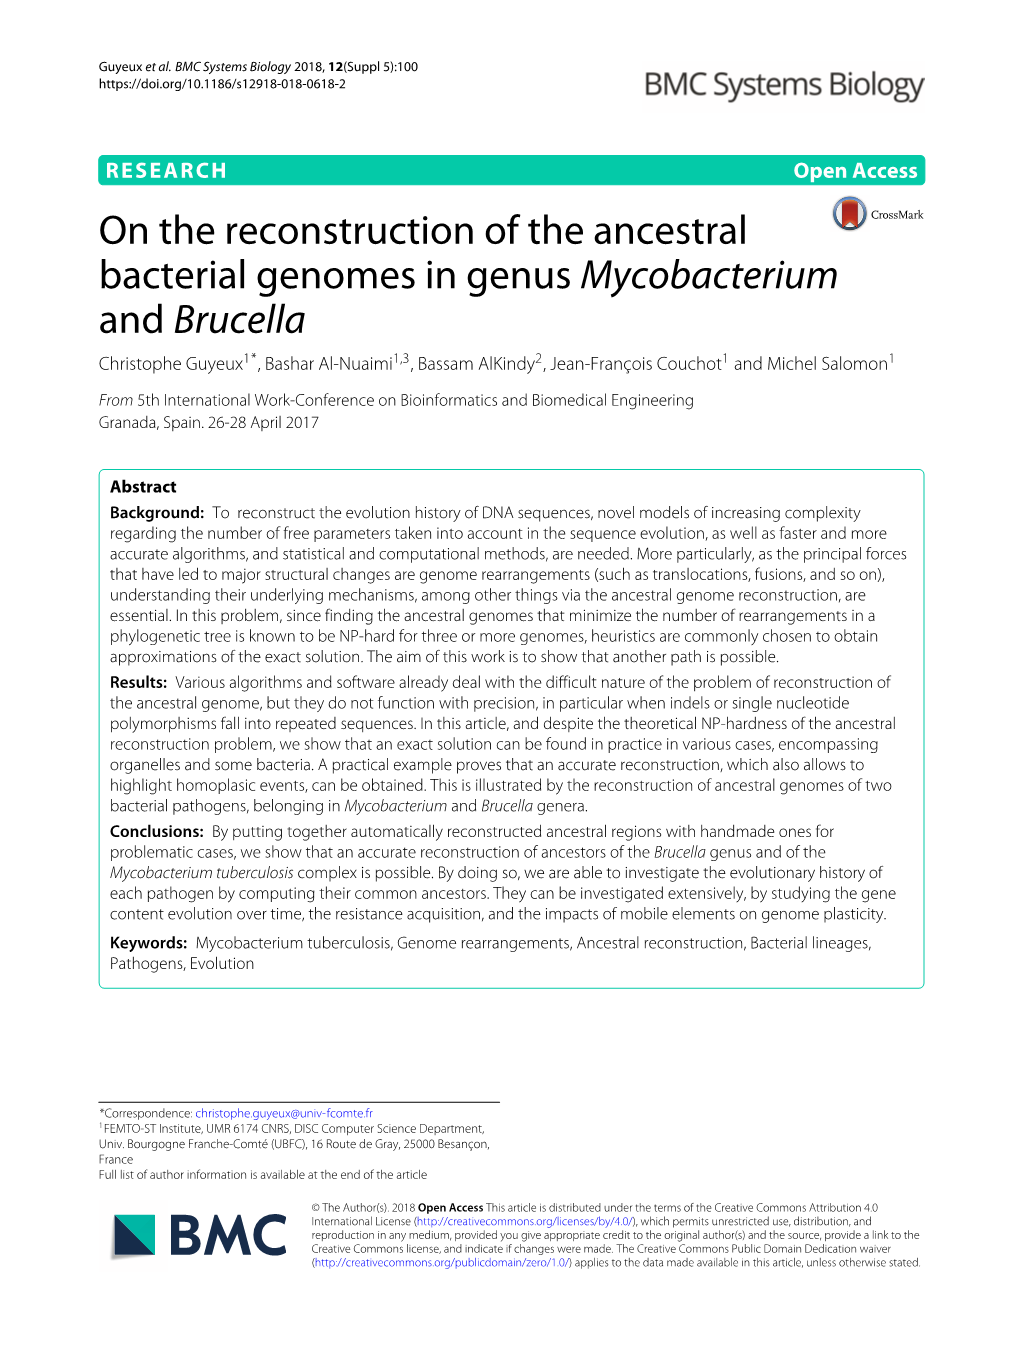 On the Reconstruction of the Ancestral Bacterial Genomes in Genus